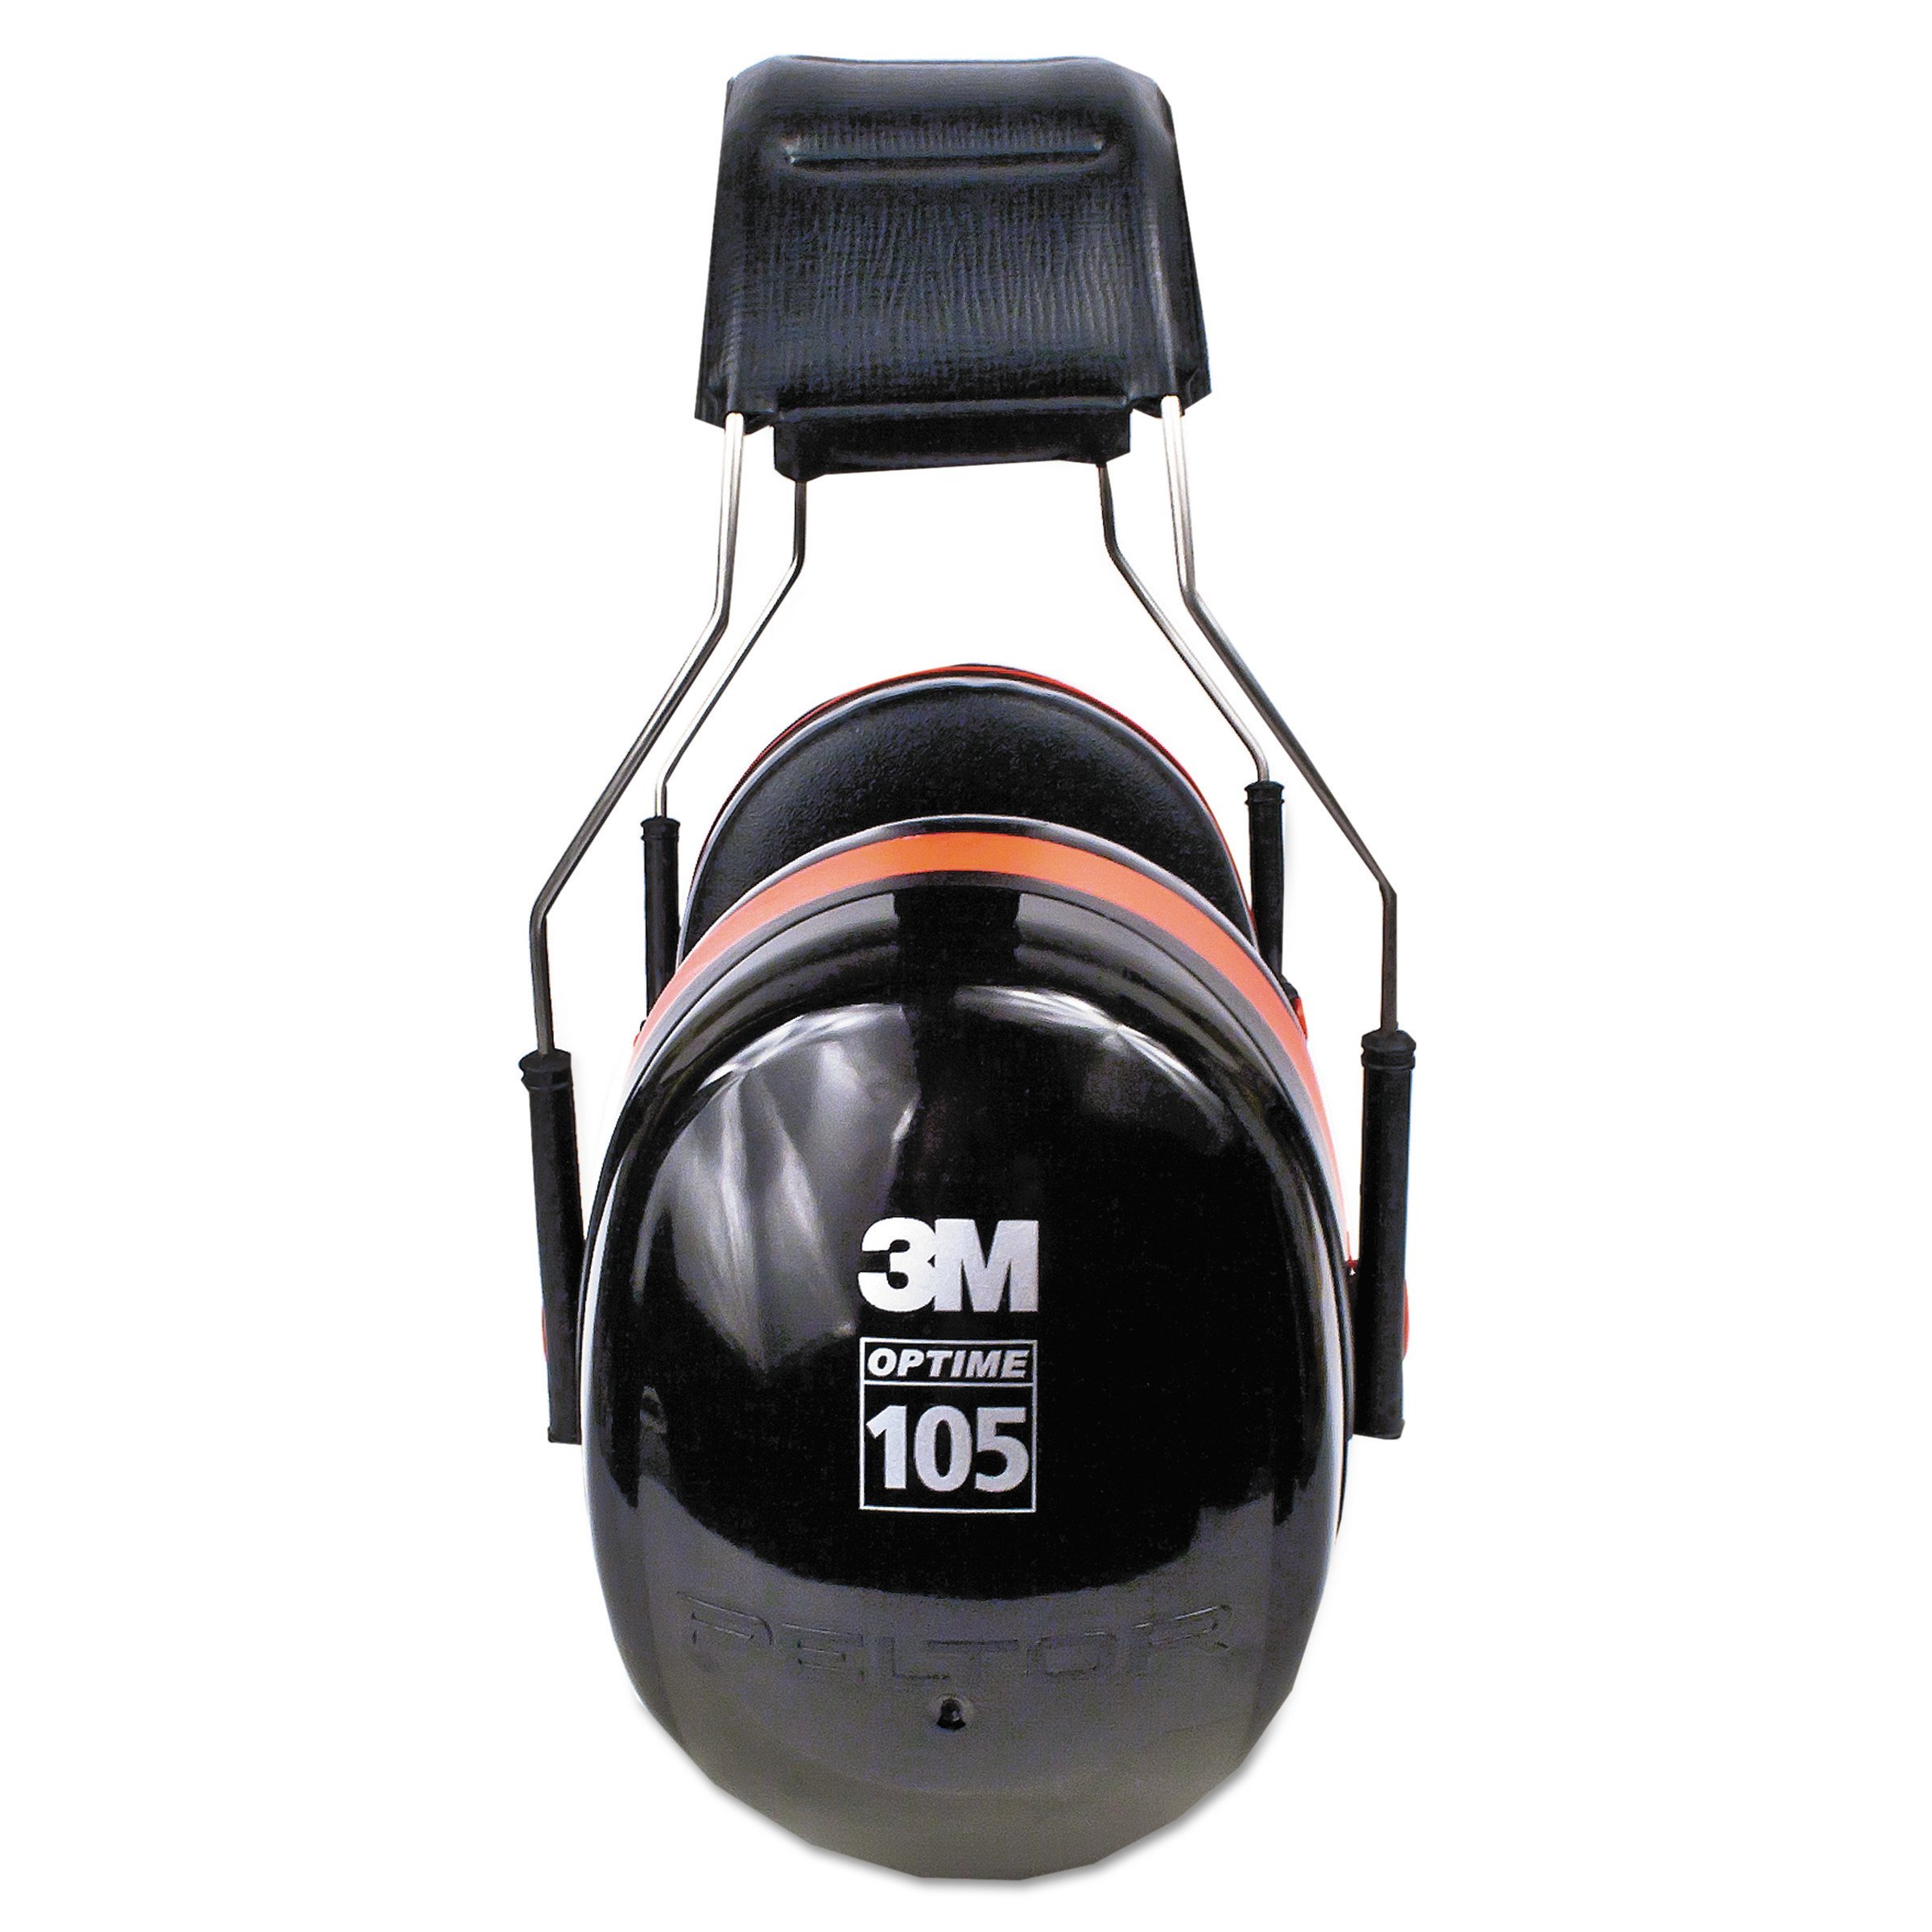 3M H10A Peltor Optime 105 Over the Head Earmuff, Ear Protectors, Hearing  Protection, NRR 30 dB,Black, Red Over-the-head